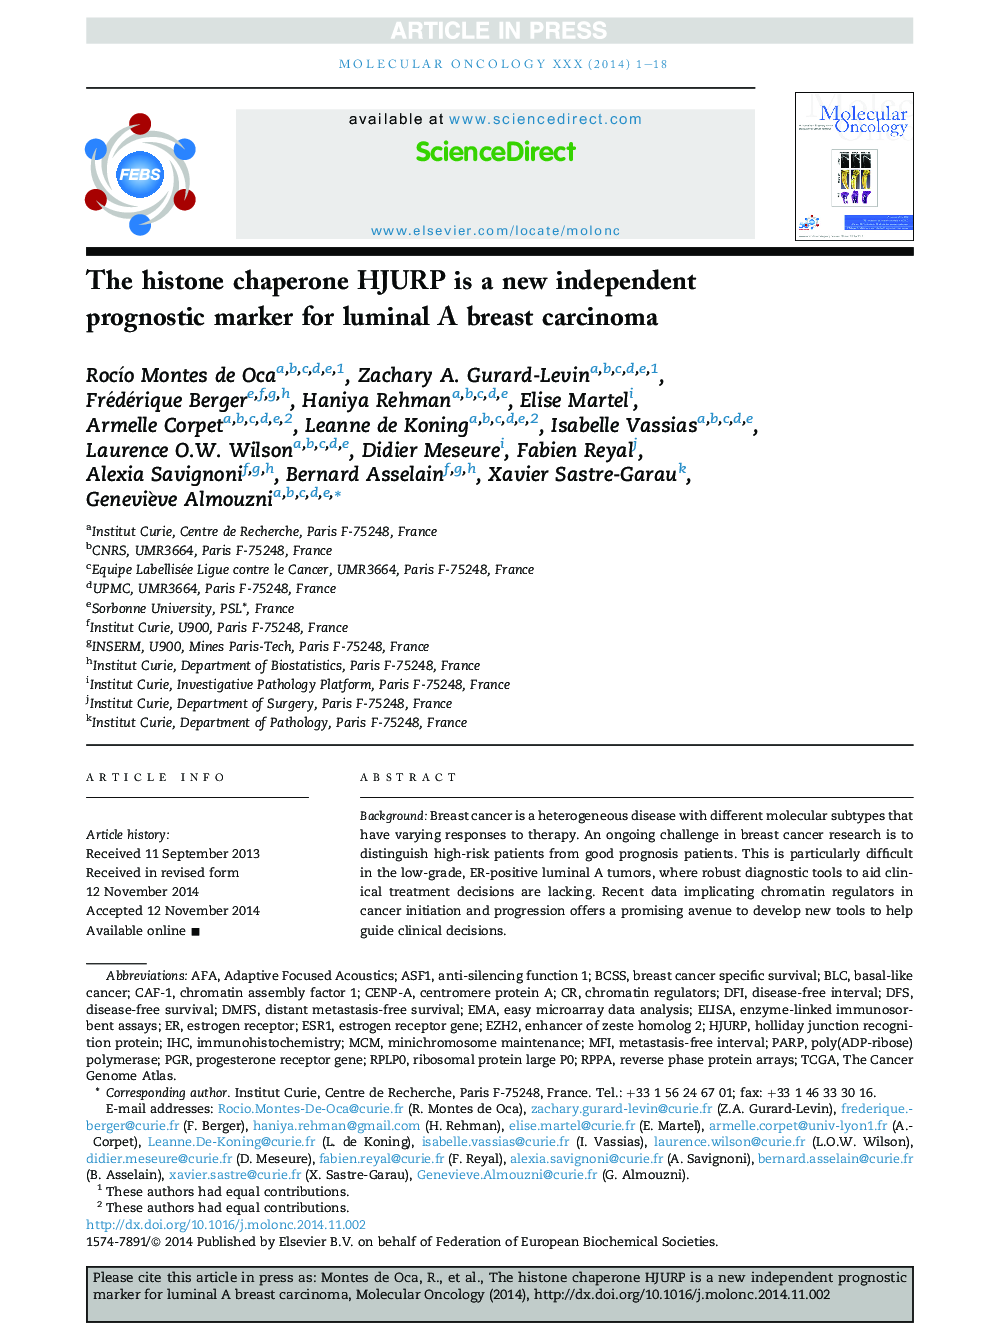 The histone chaperone HJURP is a new independent prognostic marker for luminal A breast carcinoma